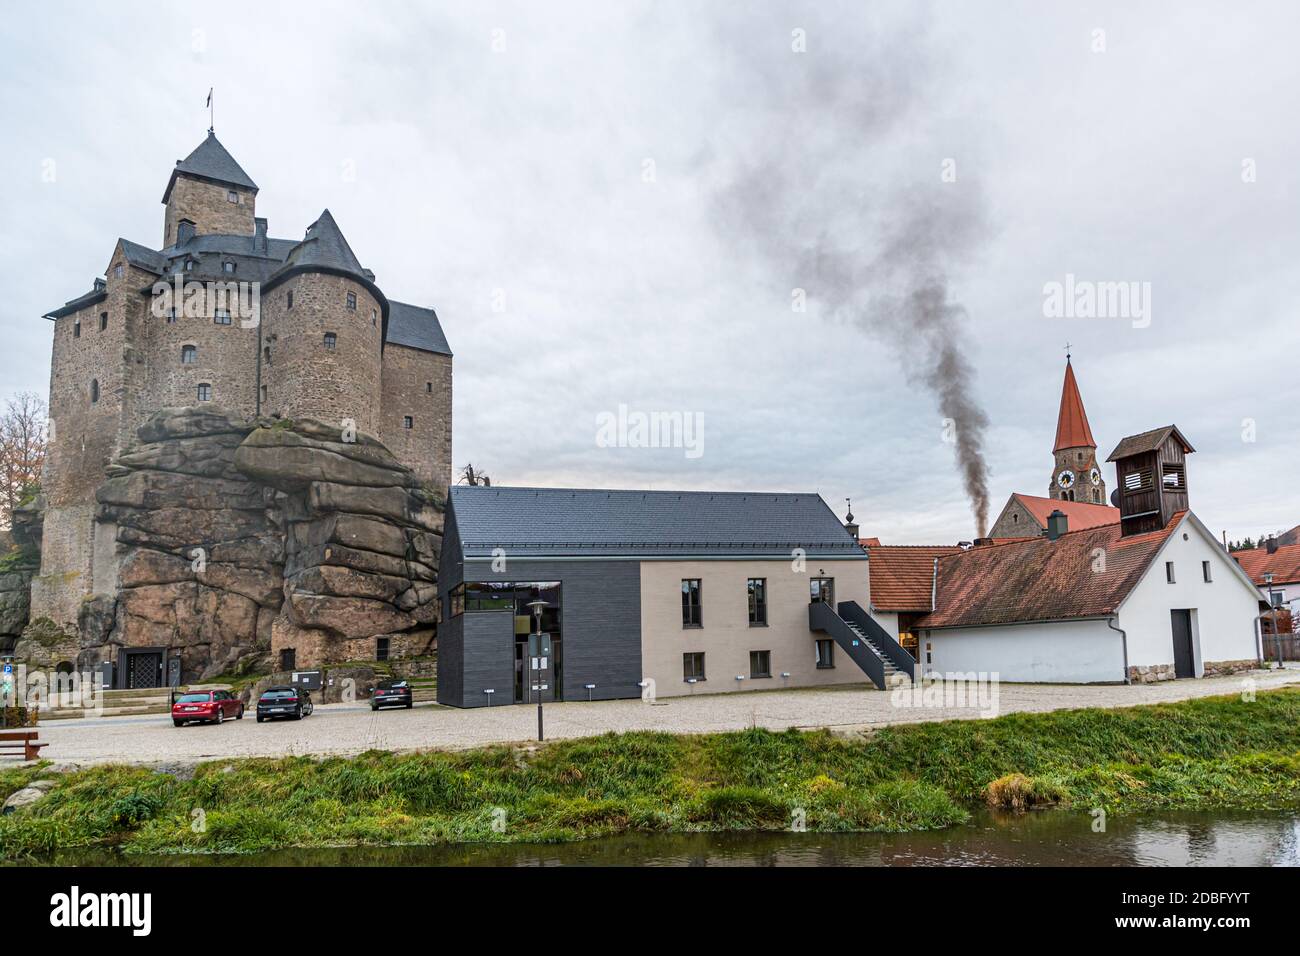 Black smoke rises above the Traditional Community Zoigl Brewery in Falkenberg, Germany Stock Photo